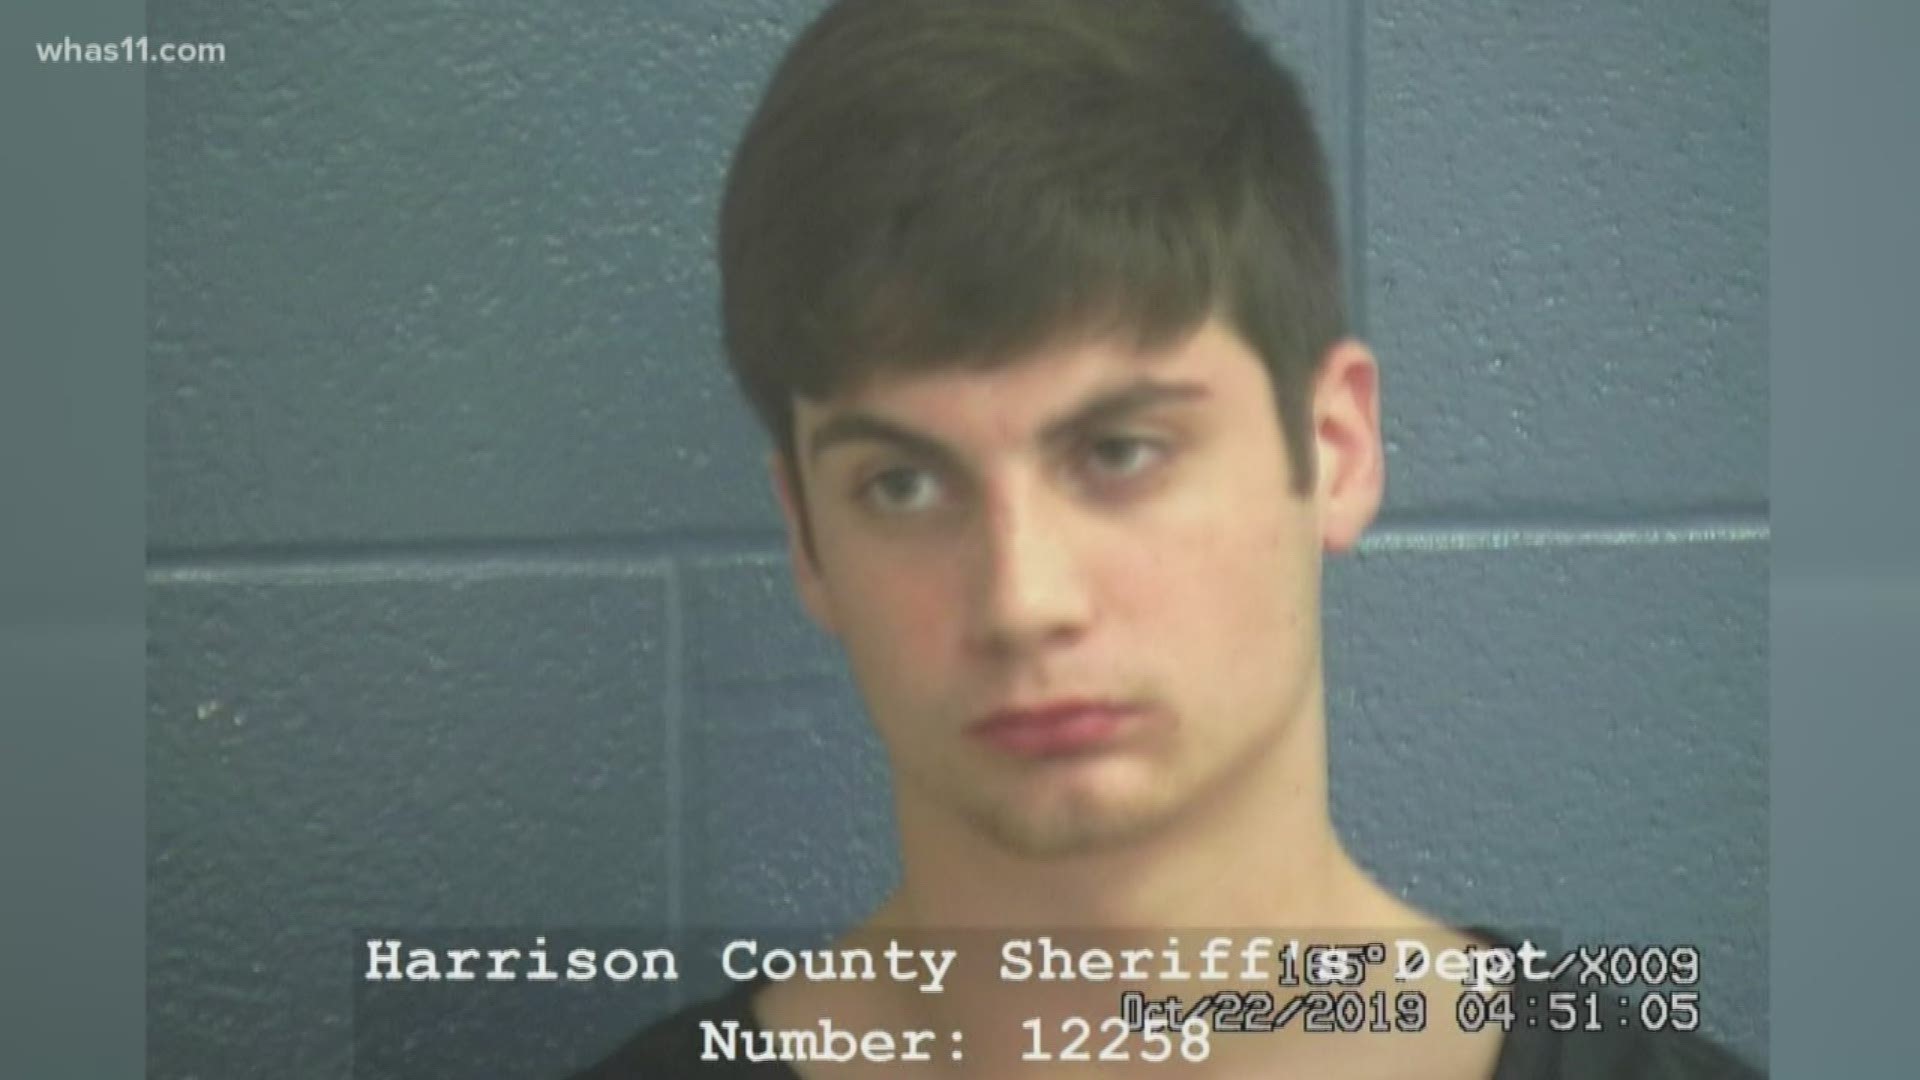 The Harrison County Sheriff's Department said Samuel Smith and two other guys were in a truck that ran over one person.